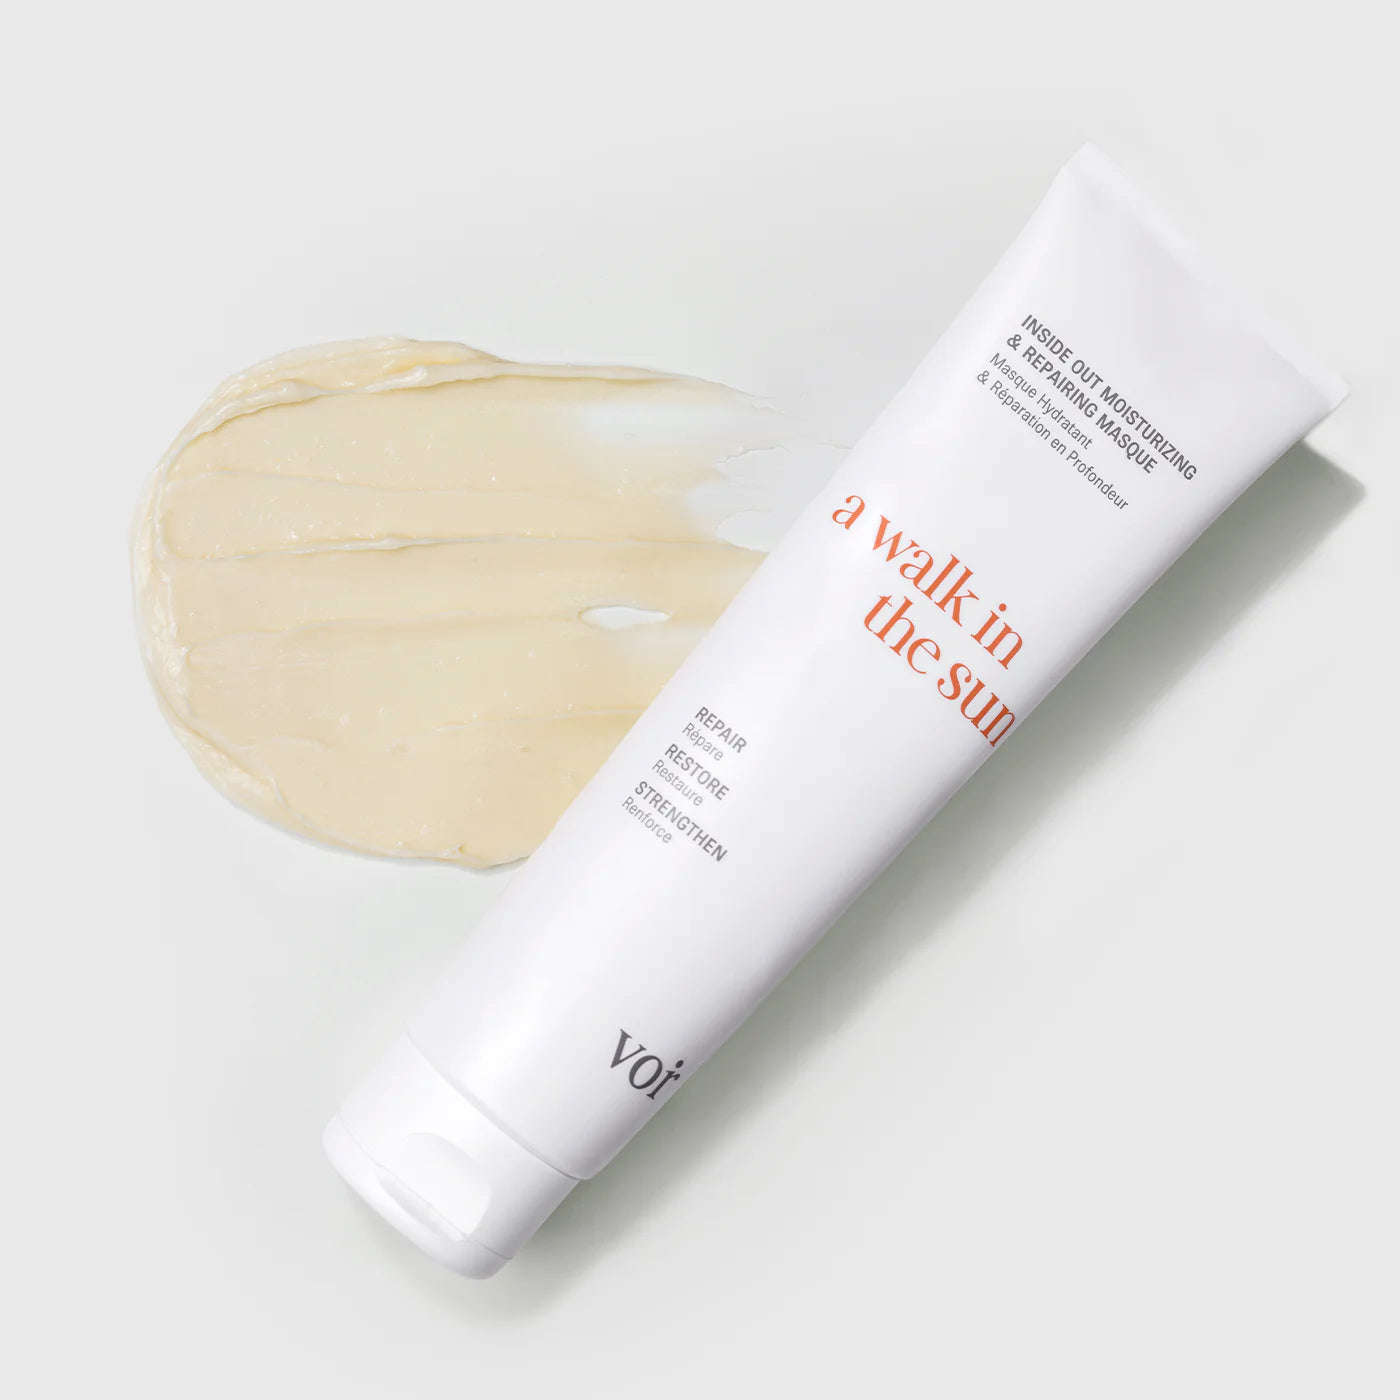 A walk in the Sun: Inside Out Moisturizing & Repairing Masque